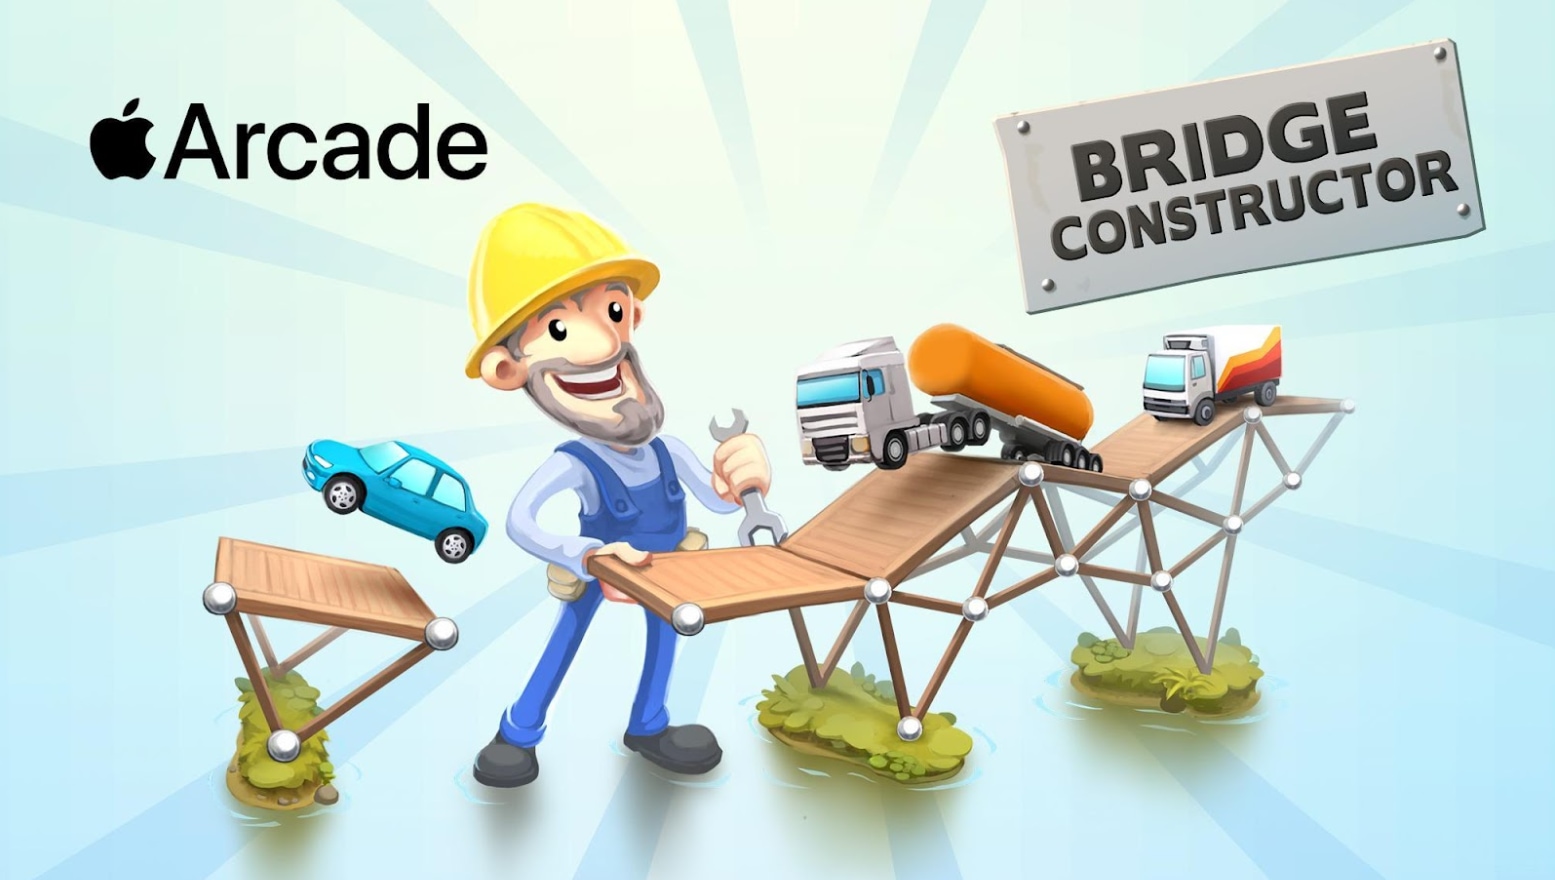 Promotional graphics for the Bridge Constructor game, relaunched on Apple Arcade as Bridge Constructor+